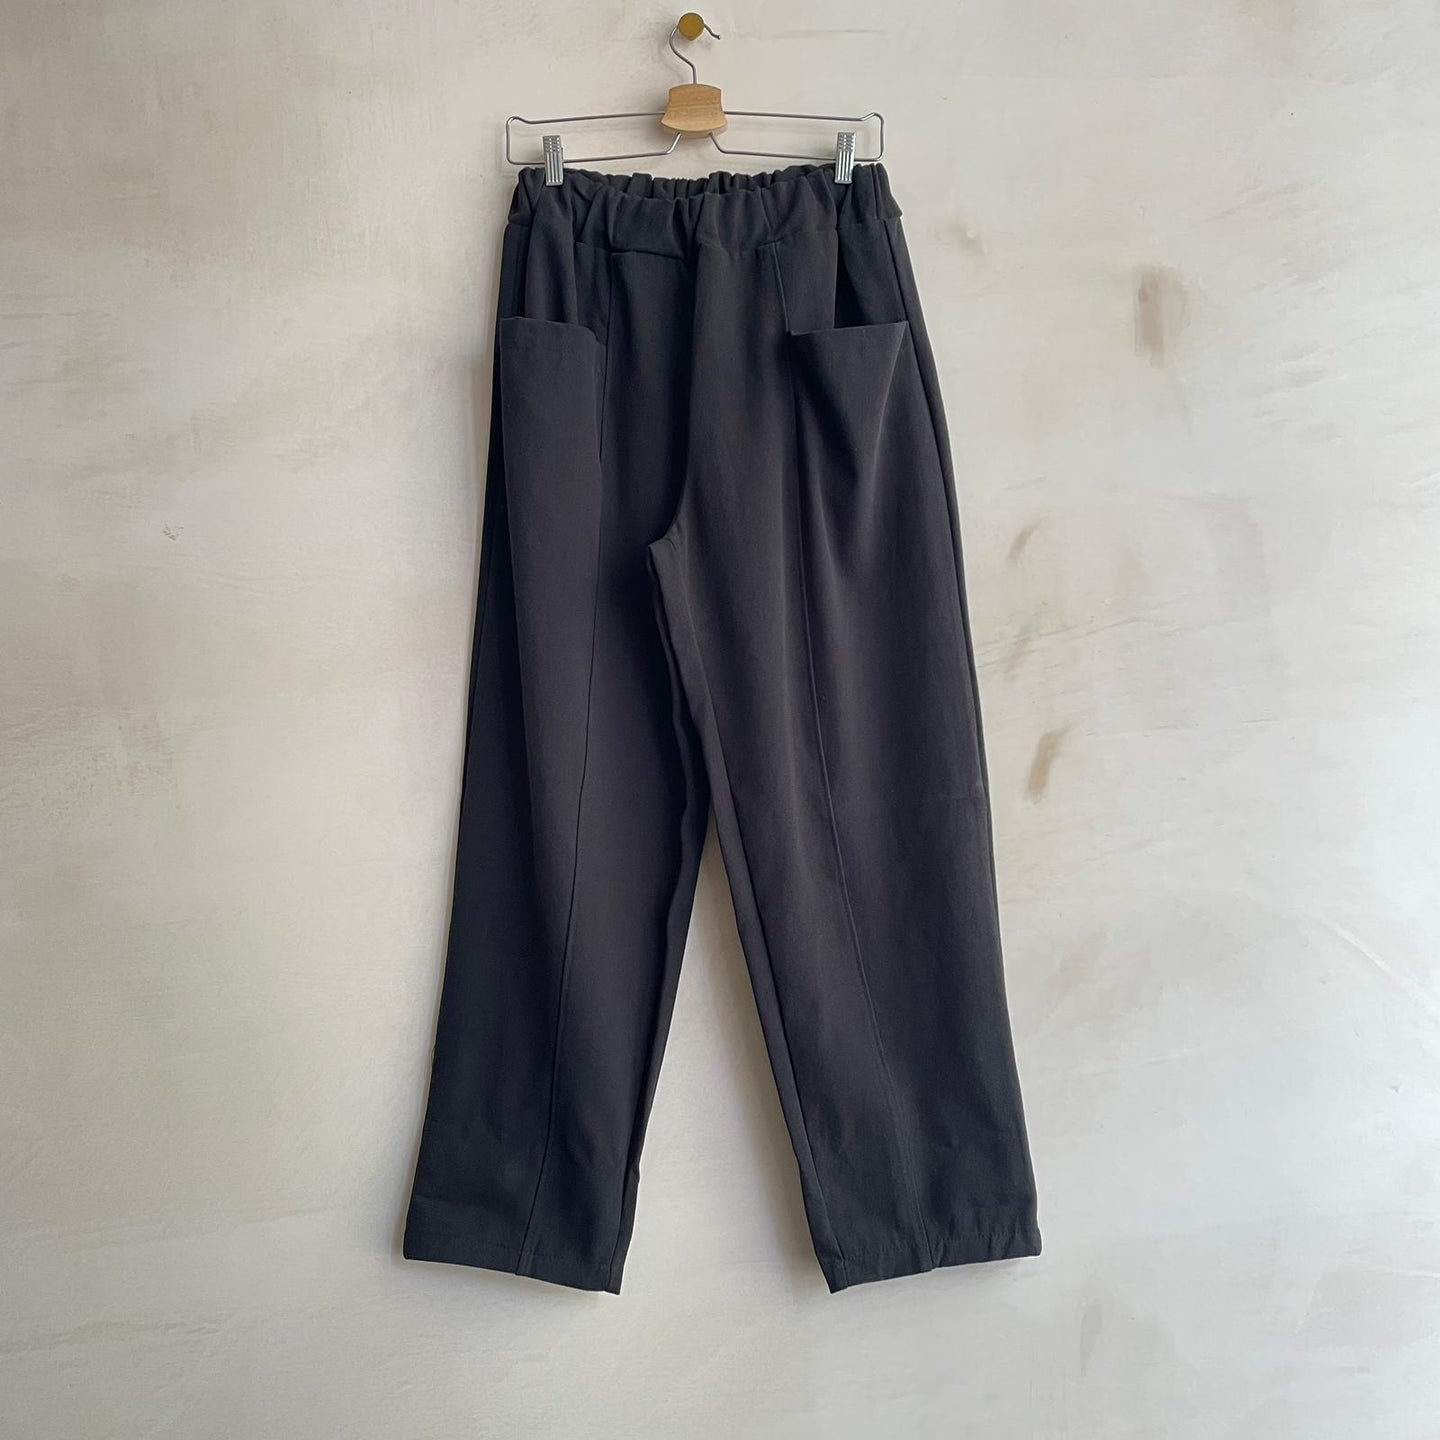 Full Length baggy Trousers with Floppy Front Pockets -Black-